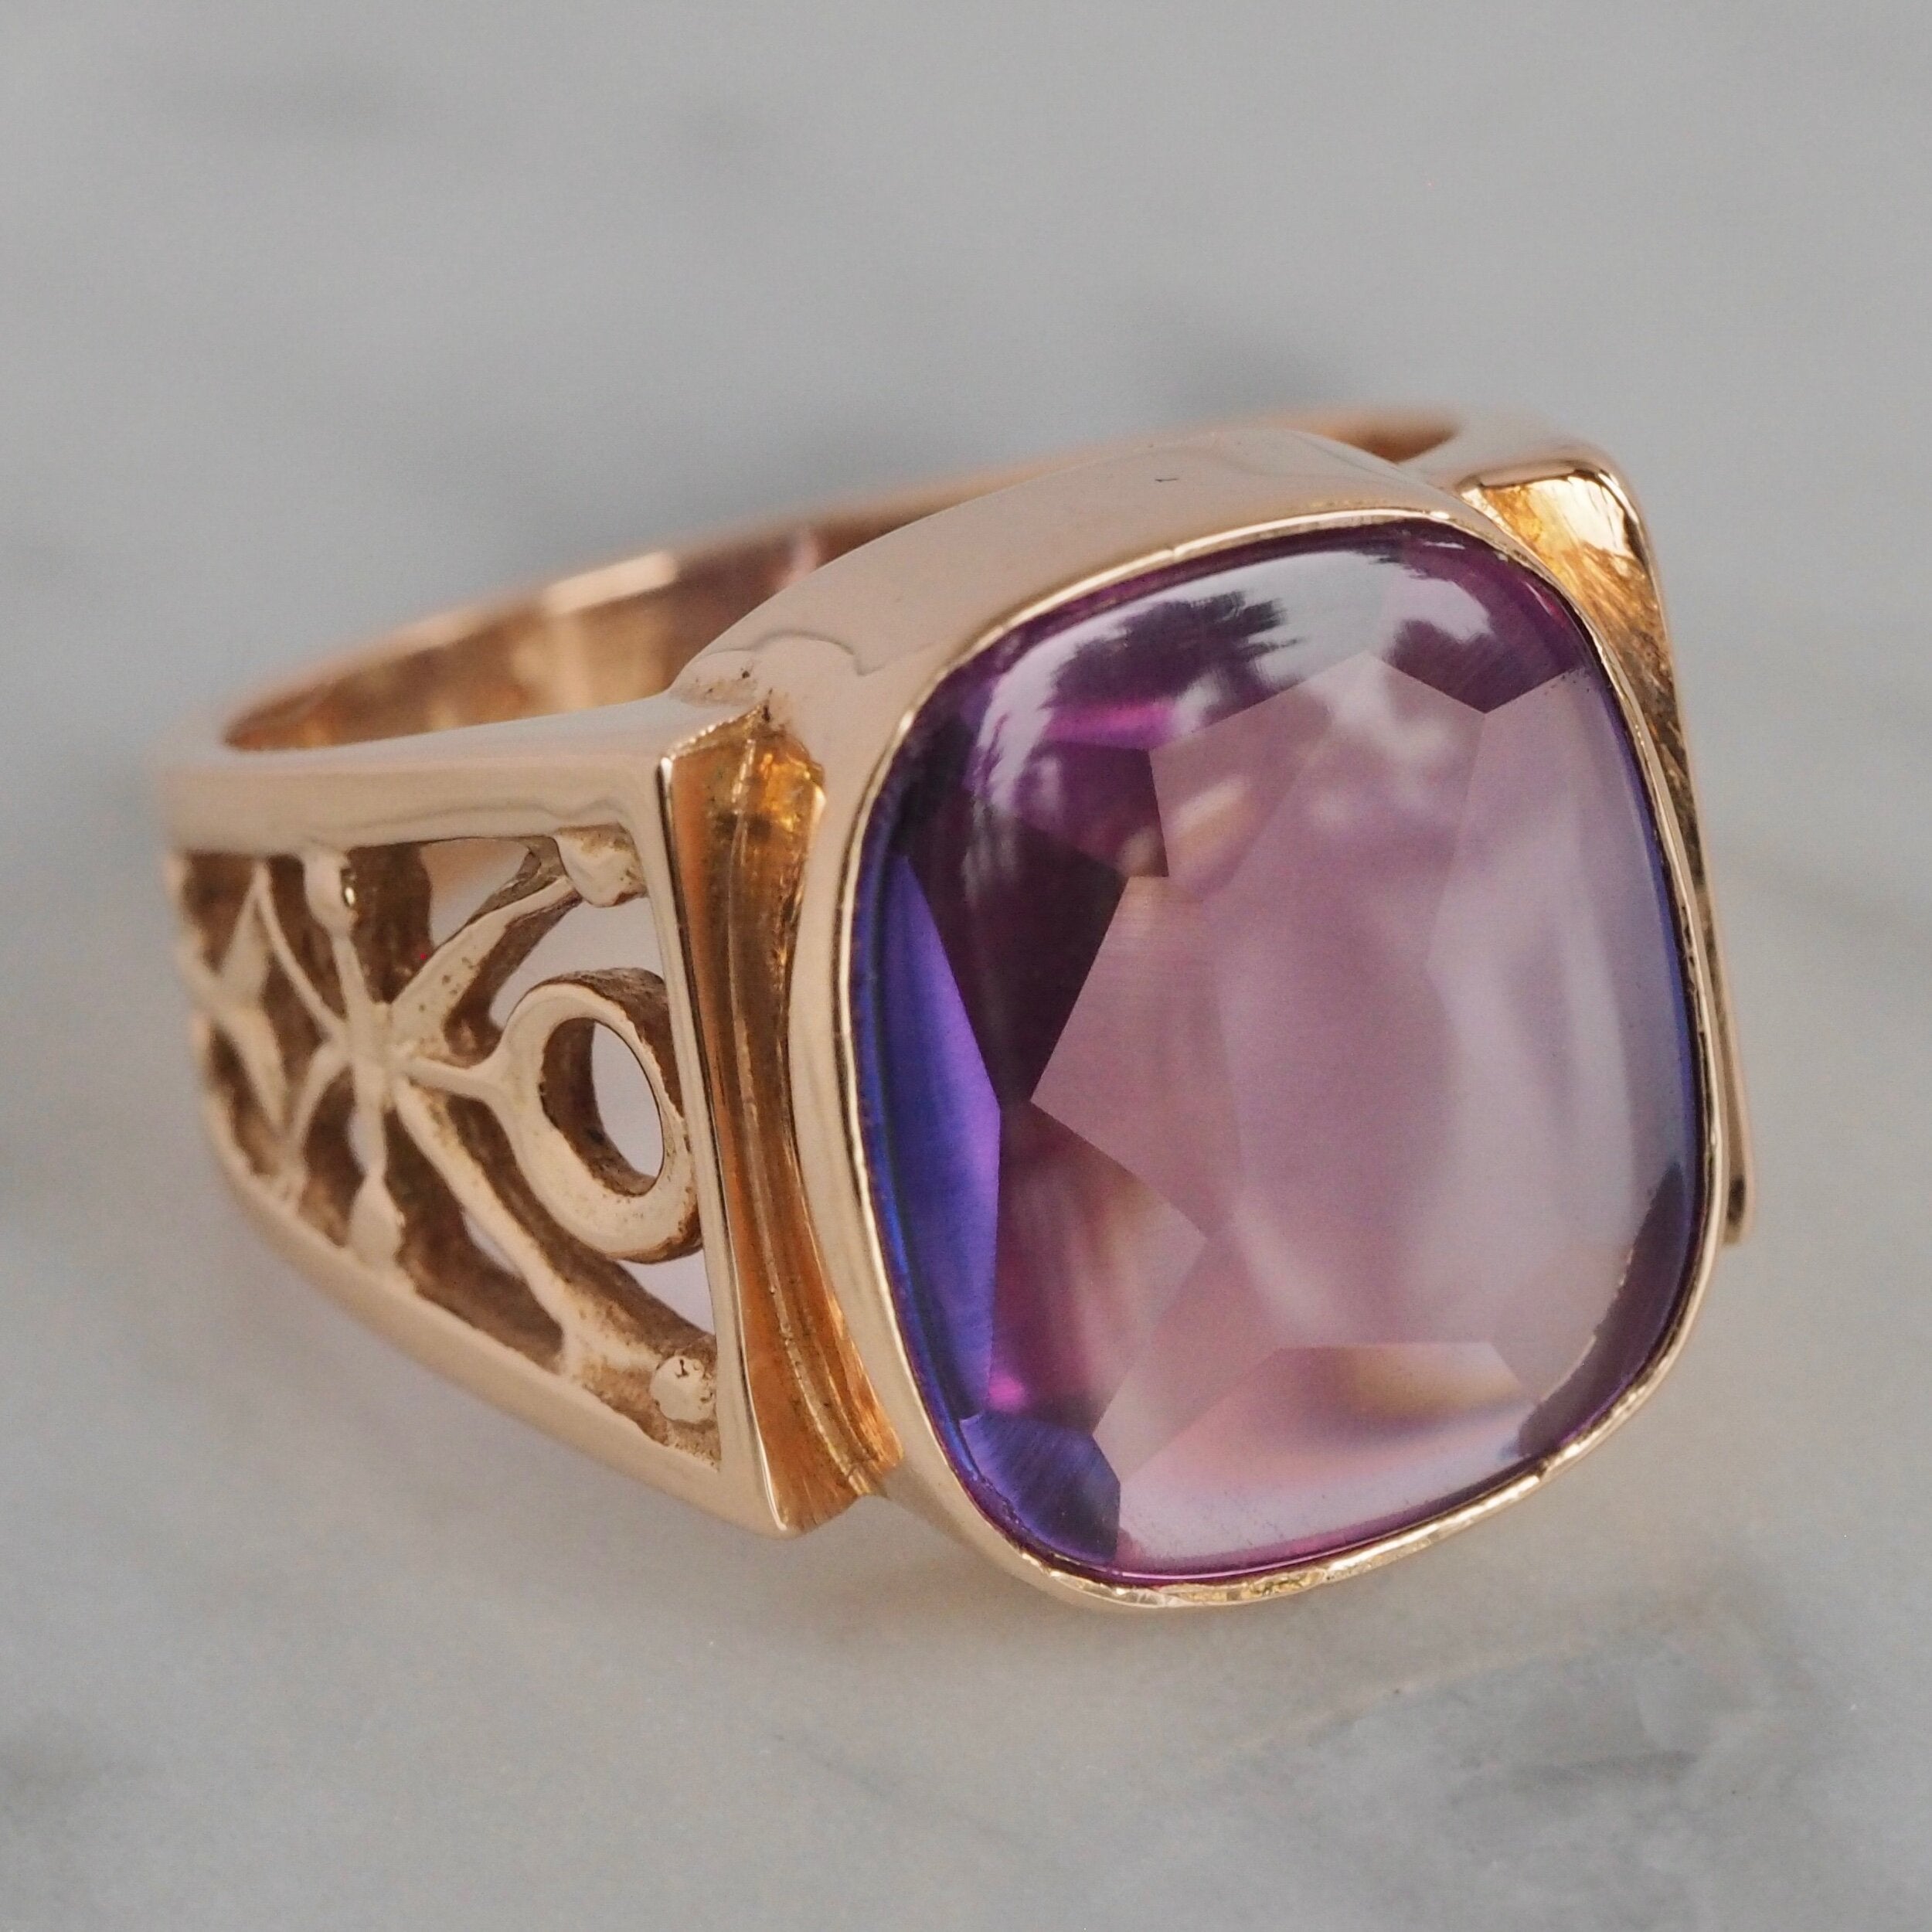 Vintage c. Late 1960's Hungarian 14k Rose Gold Buff Cut Lab Grown Sapphire Ring